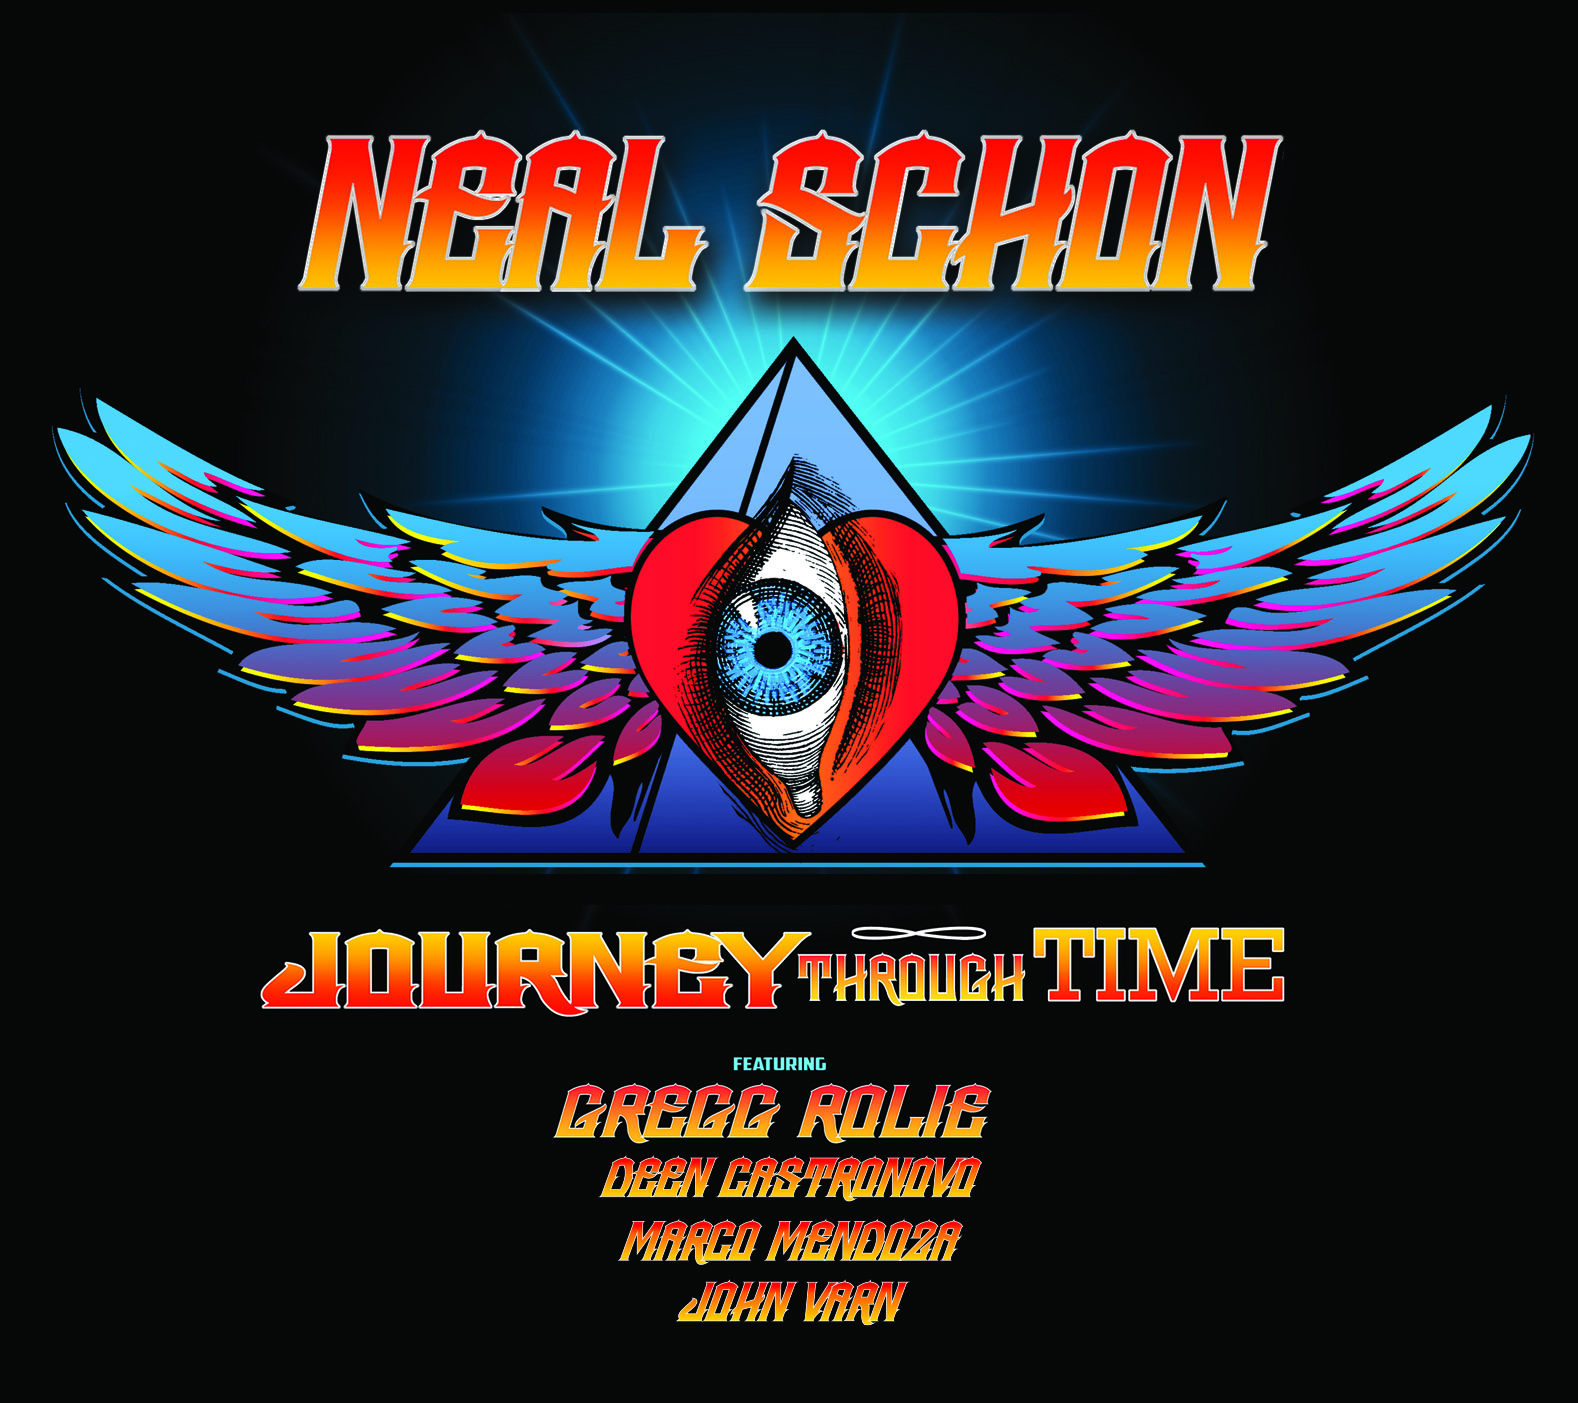 Neal Schon - Journey Through Time - 3xCD+DVD